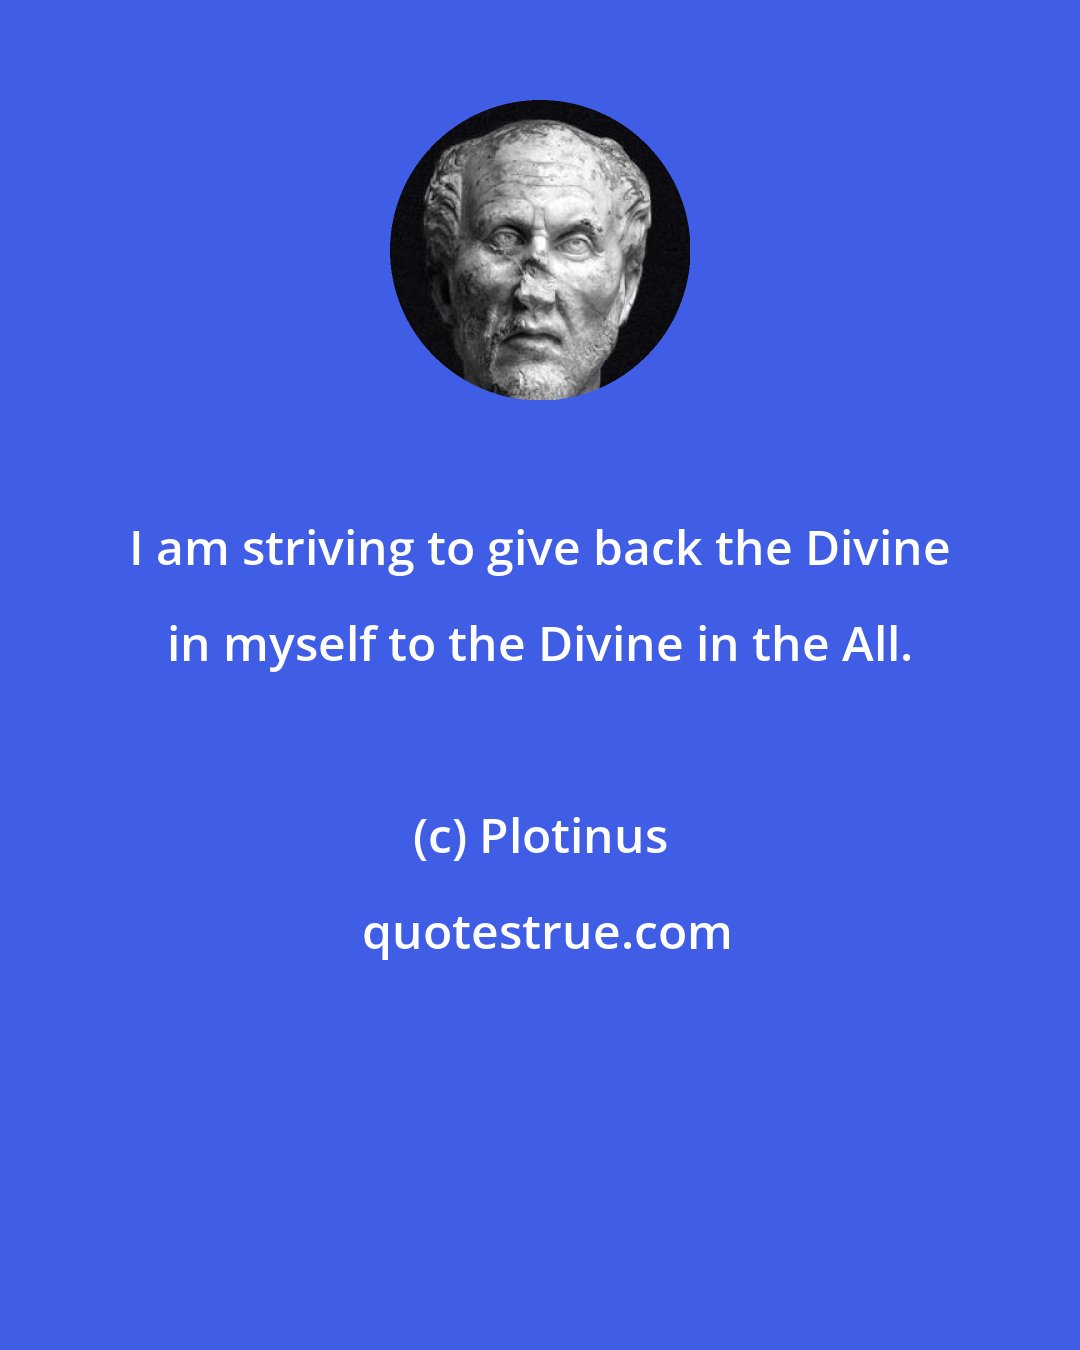 Plotinus: I am striving to give back the Divine in myself to the Divine in the All.